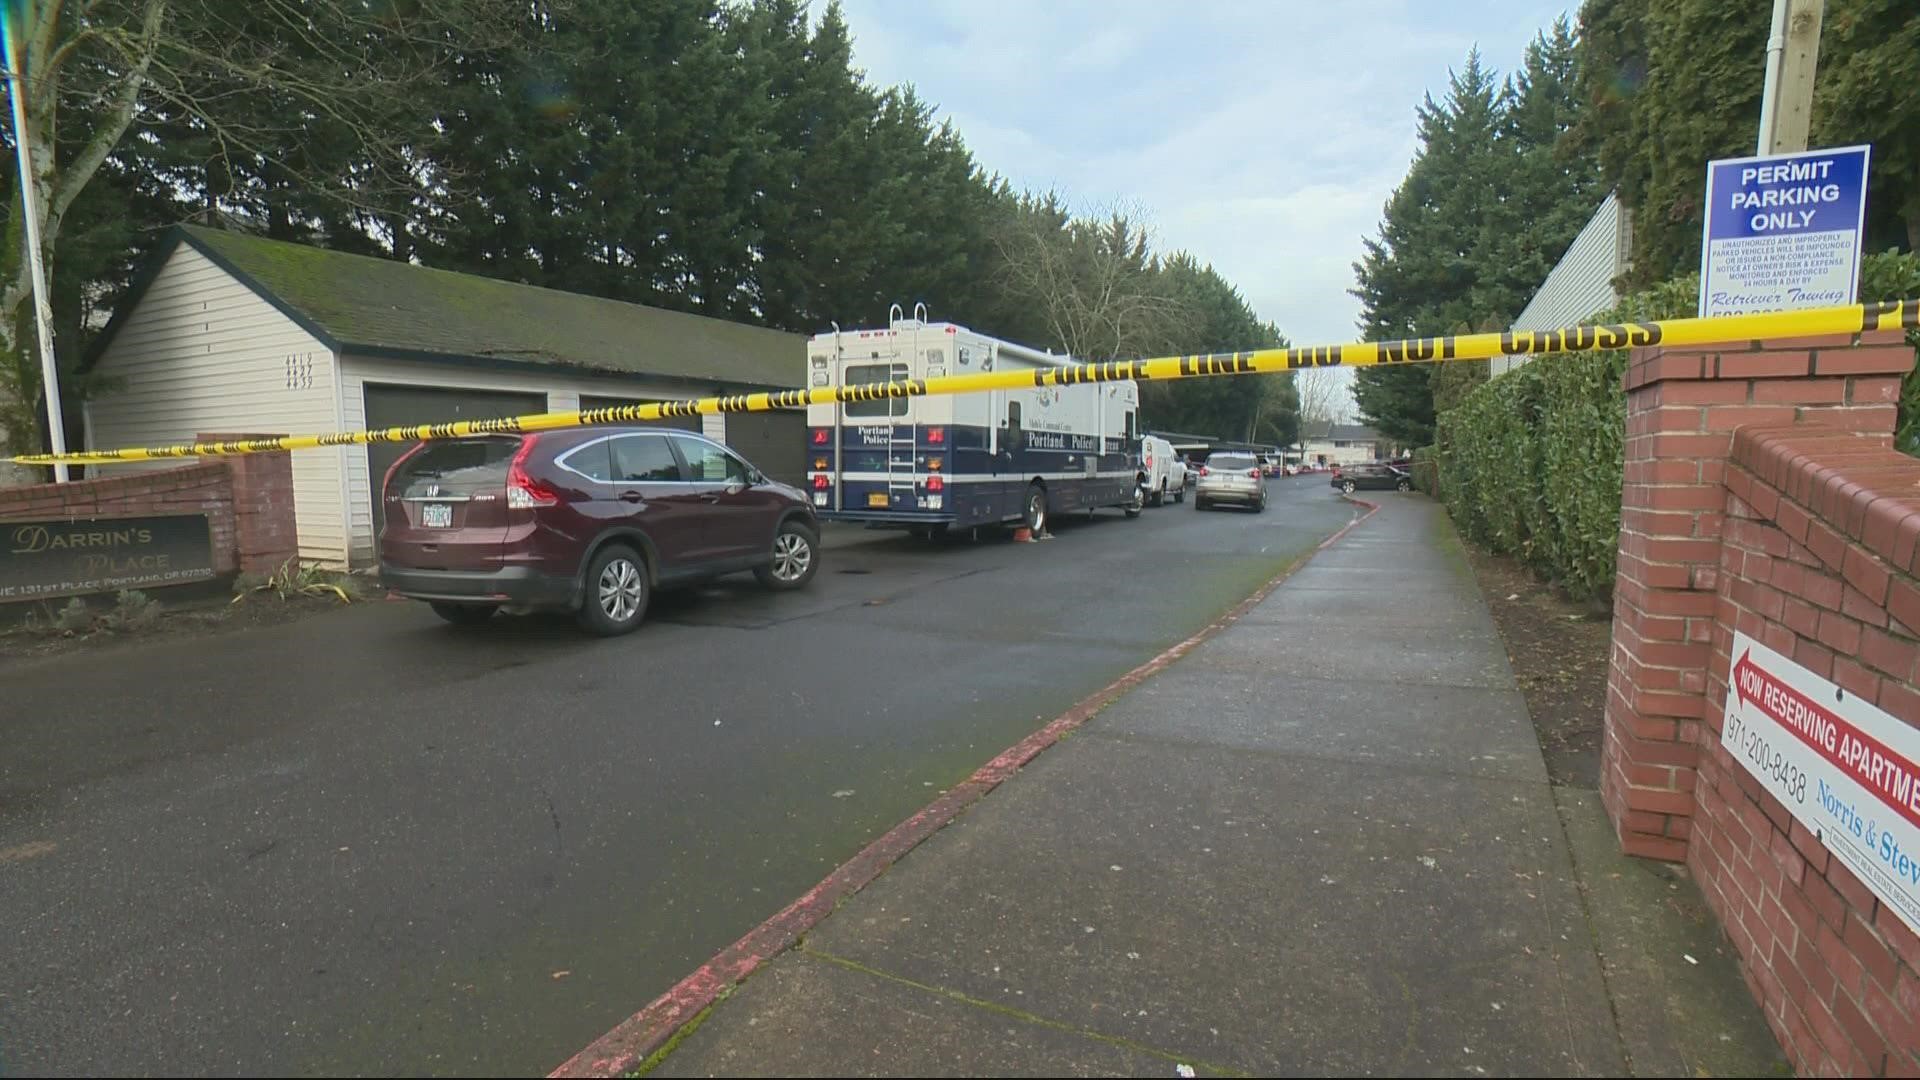 Of the 11 people shot and killed in Portland since Jan. 1, three have been killed outside an apartment complex near Northeast Sandy Boulevard and 131st Place.